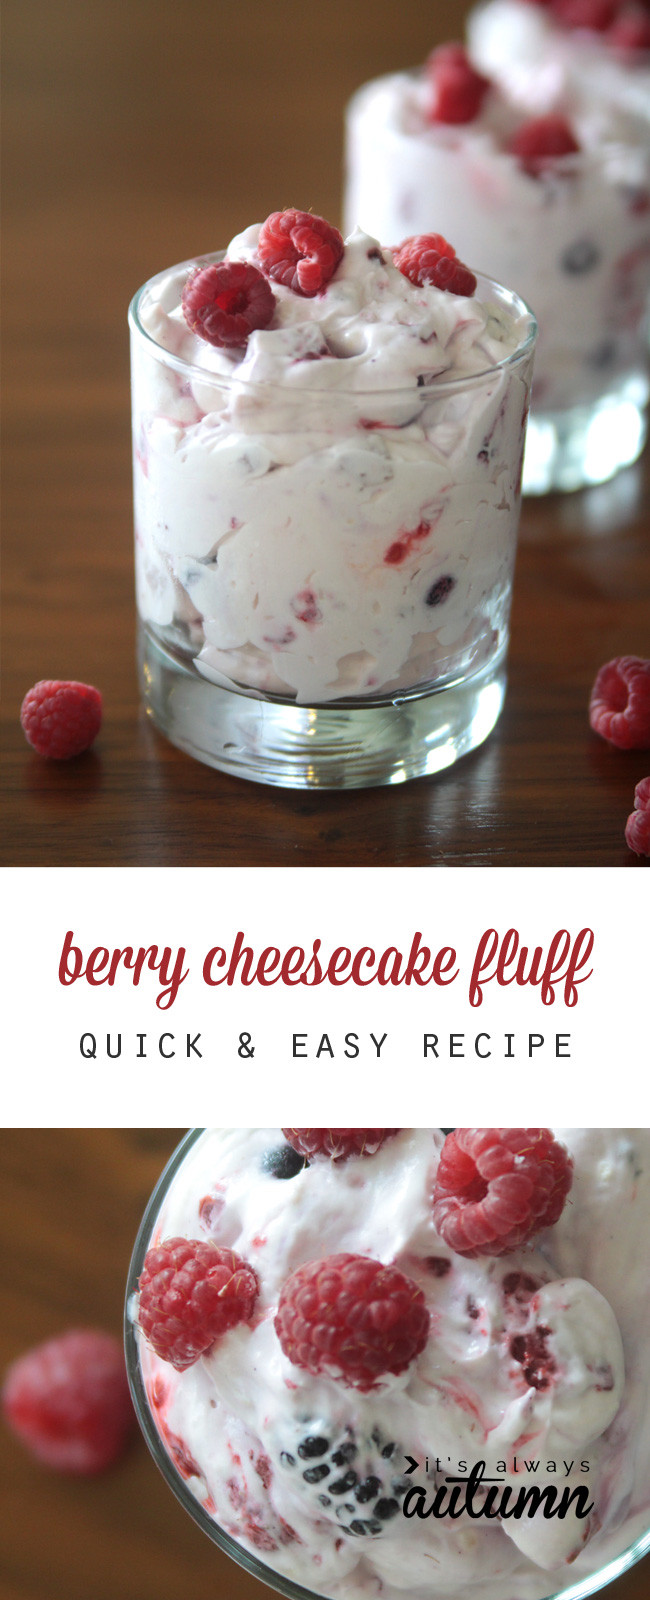 Simple Christmas Desserts Recipes
 berry cheesecake fluff a lighter holiday dessert It s